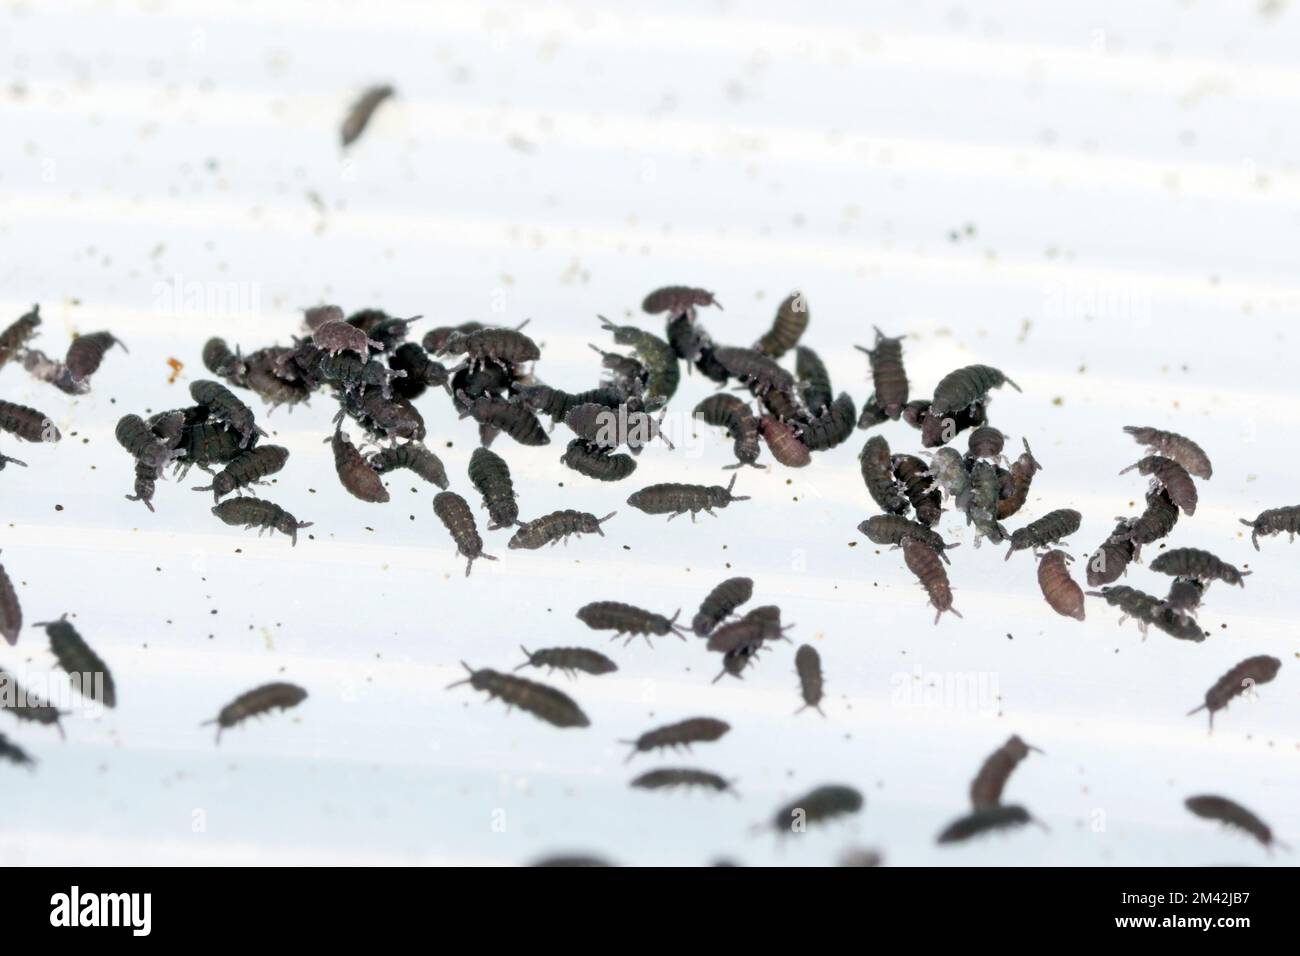 Group of Springtails, Order Collembola. Stock Photo